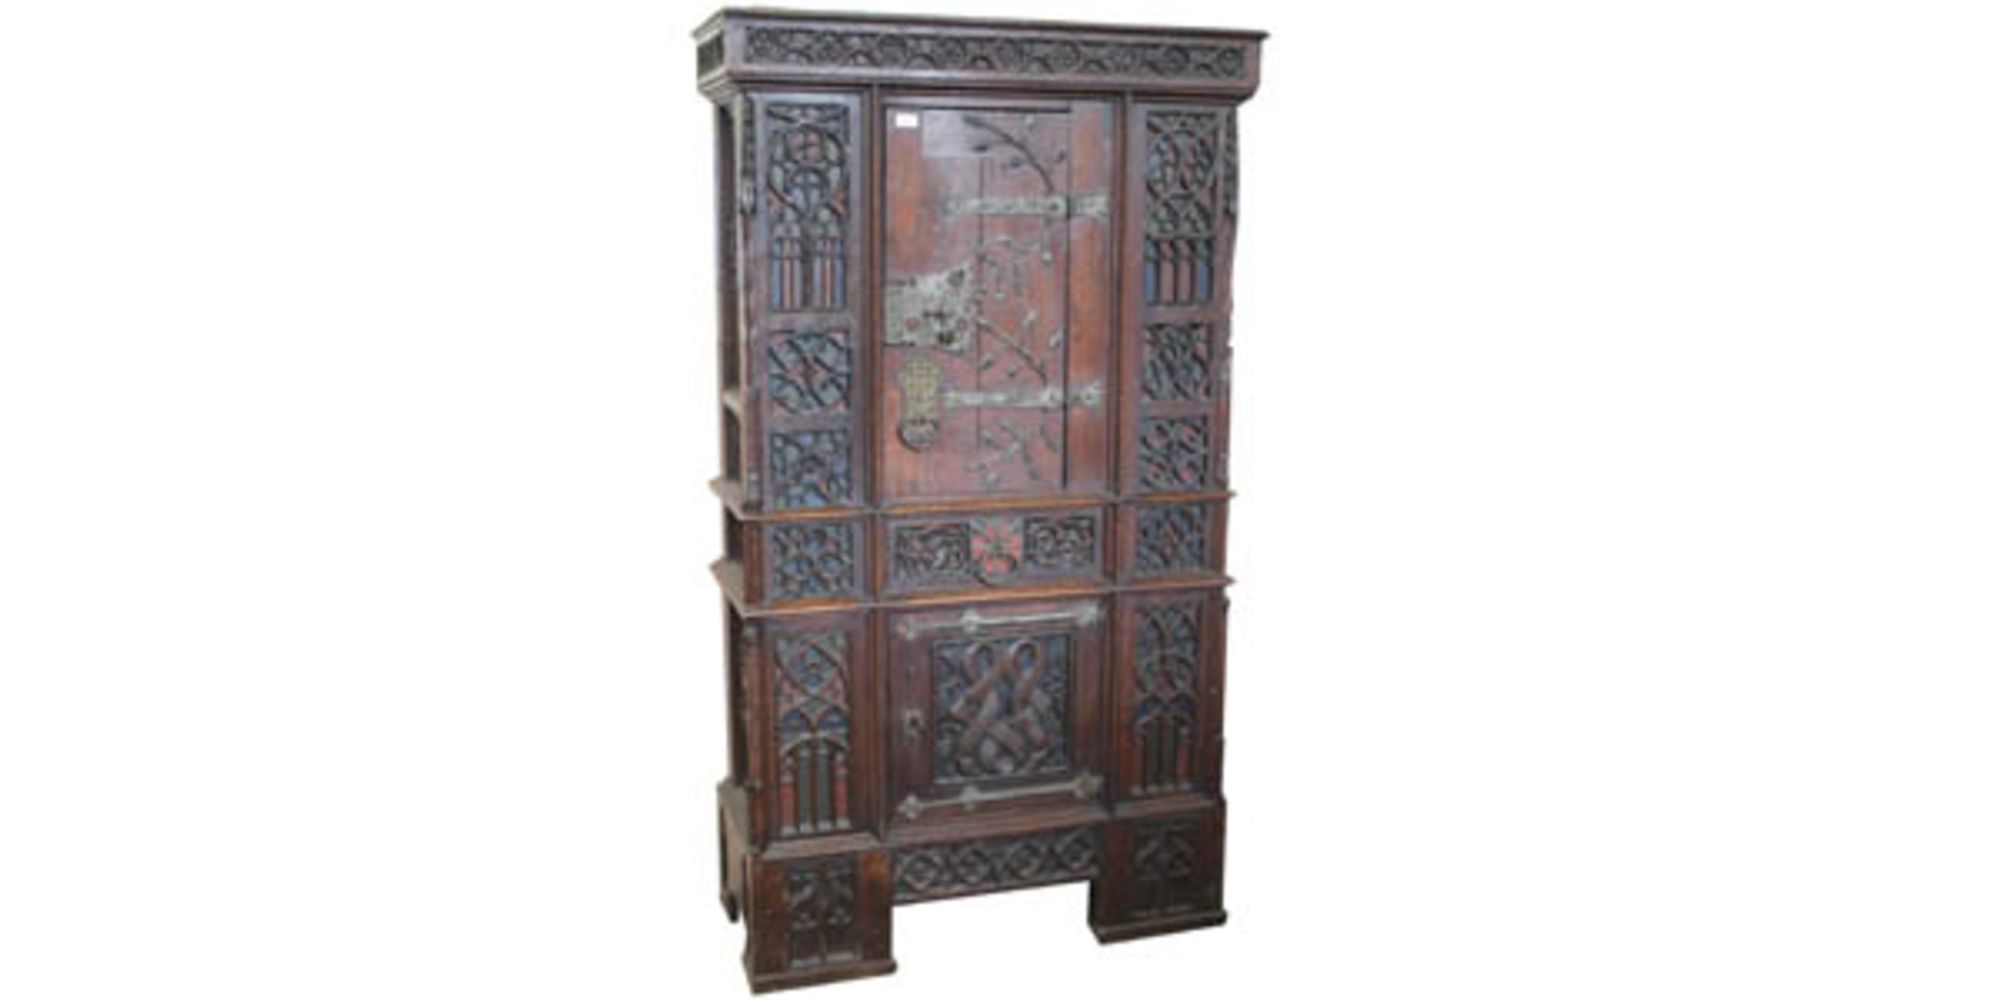 Antique and Country Pine Furniture with Rugs